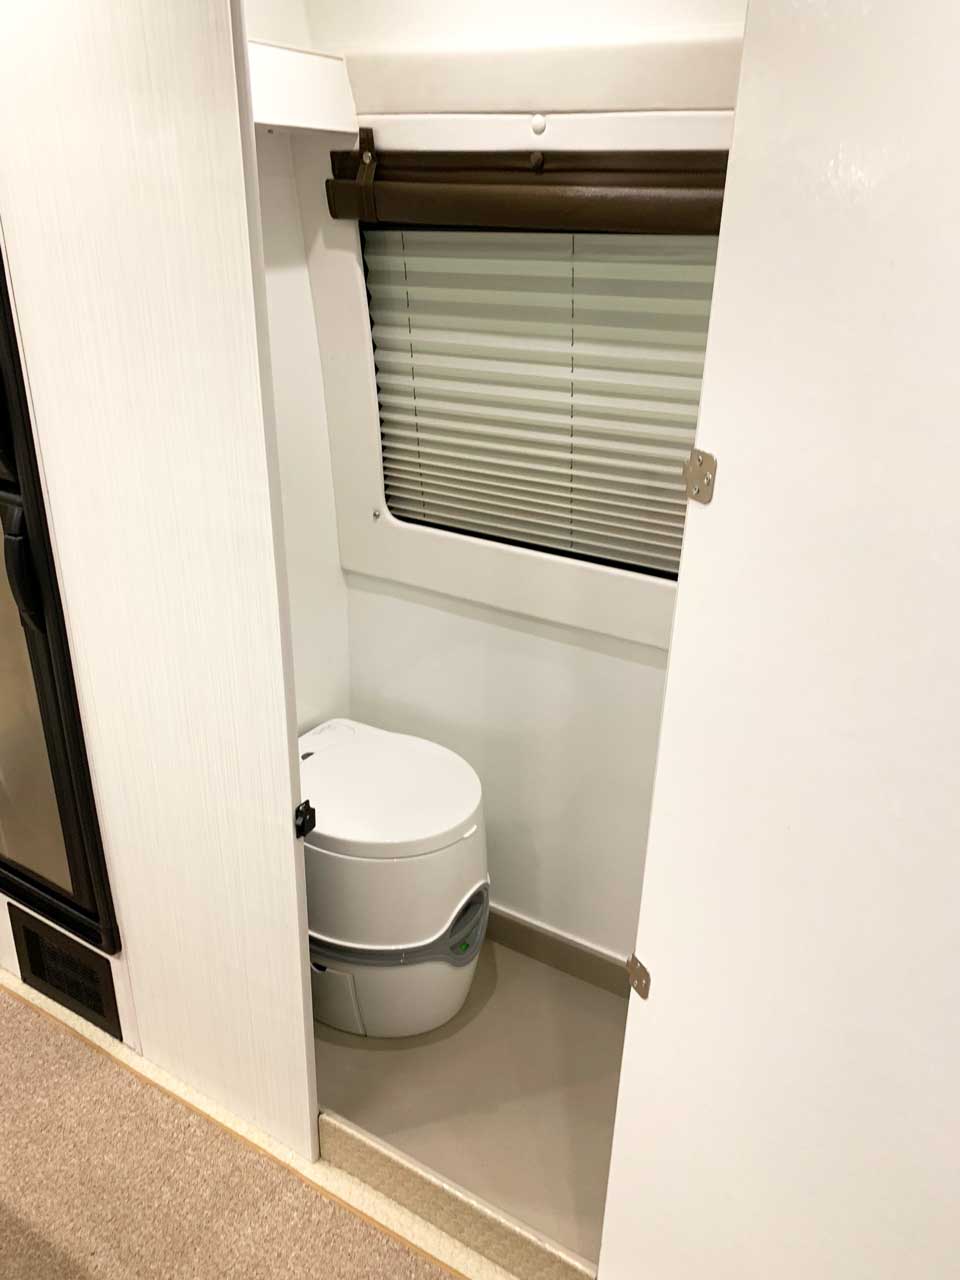 Bath compartment features toilet and shower.